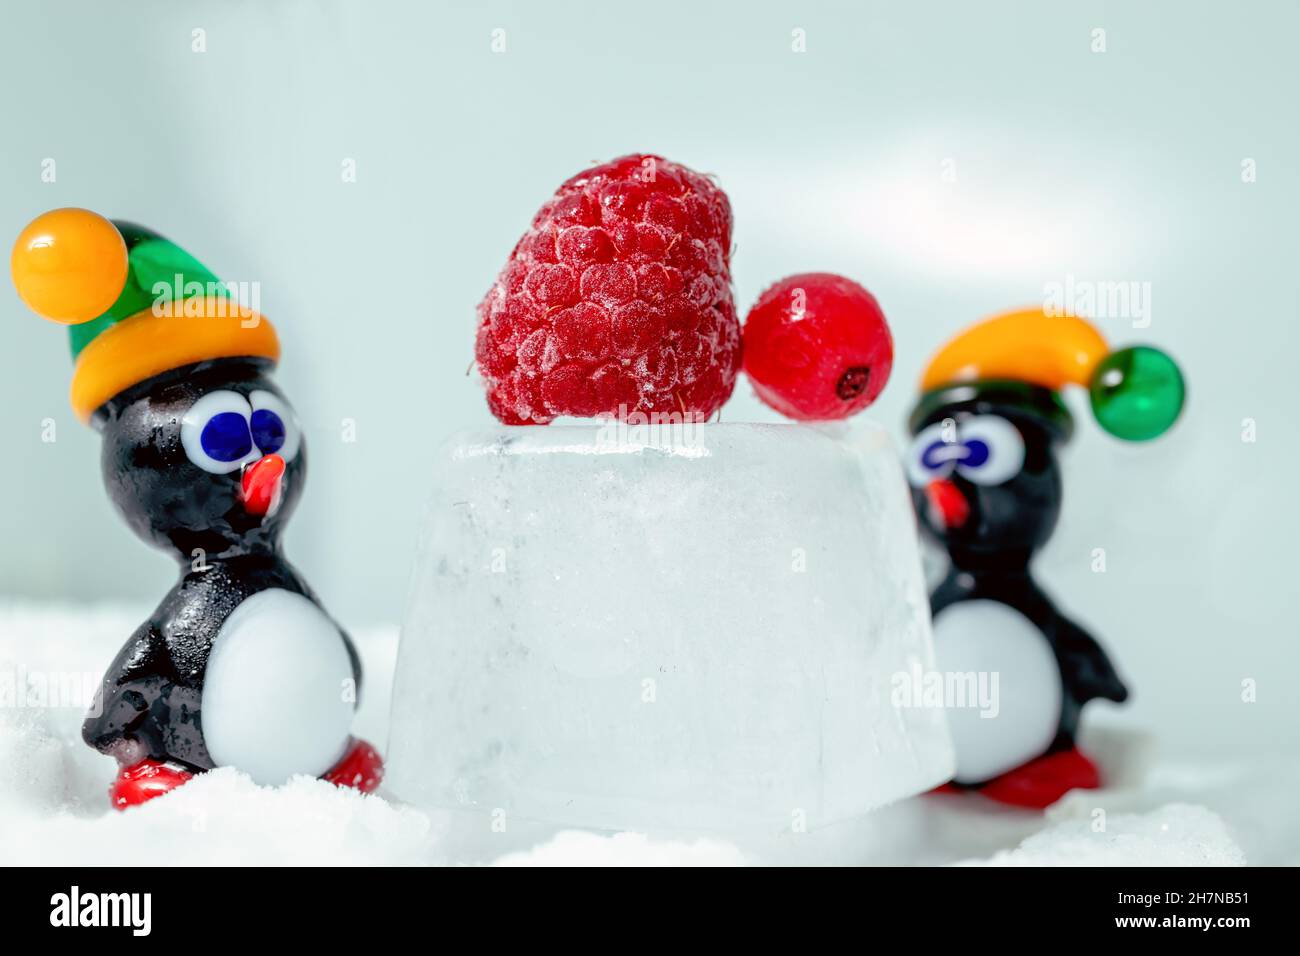 A pair of penguins made from Venetian glass in front of raspberry and red currant on the ice cube. Animal figurines made from Murano glass. Handmade. Stock Photo